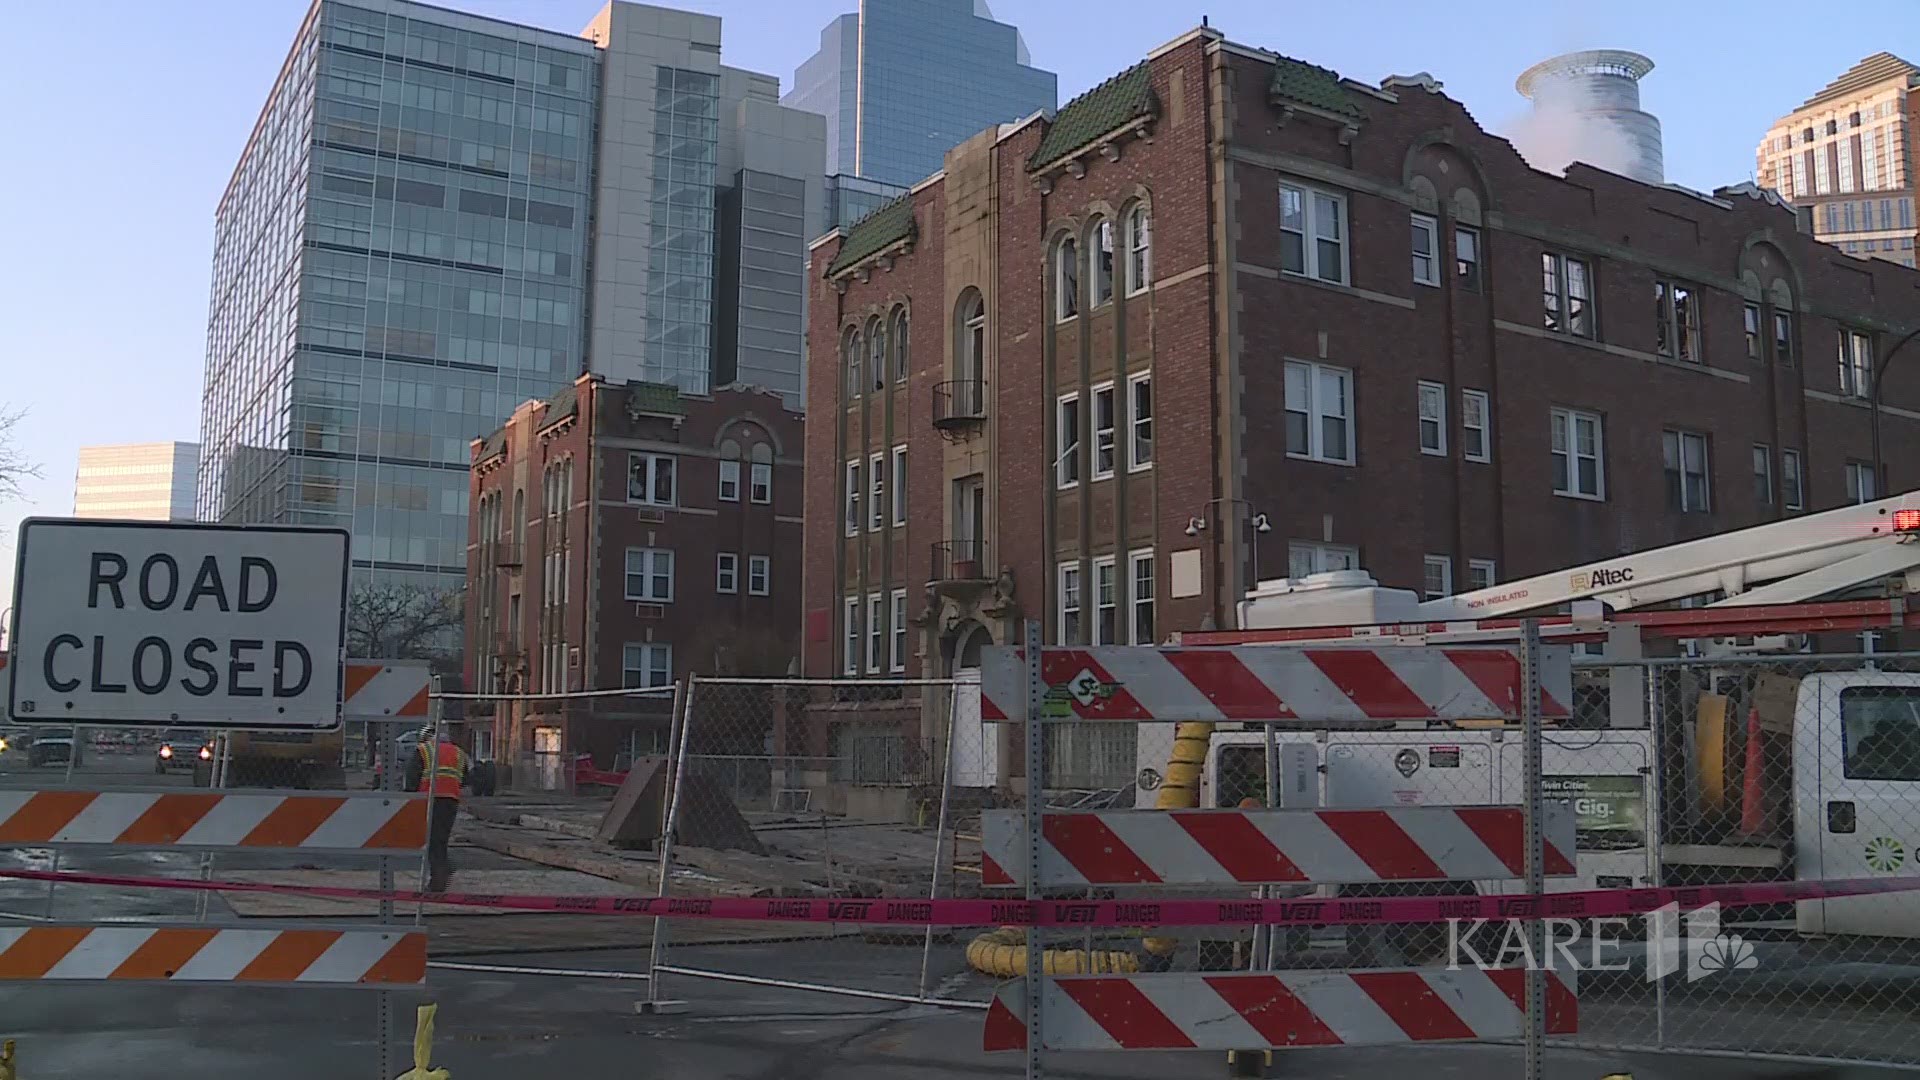 Crews prepare to begin demolition work at the Drake Hotel in Minneapolis, which was damaged by fire on Christmas Day.